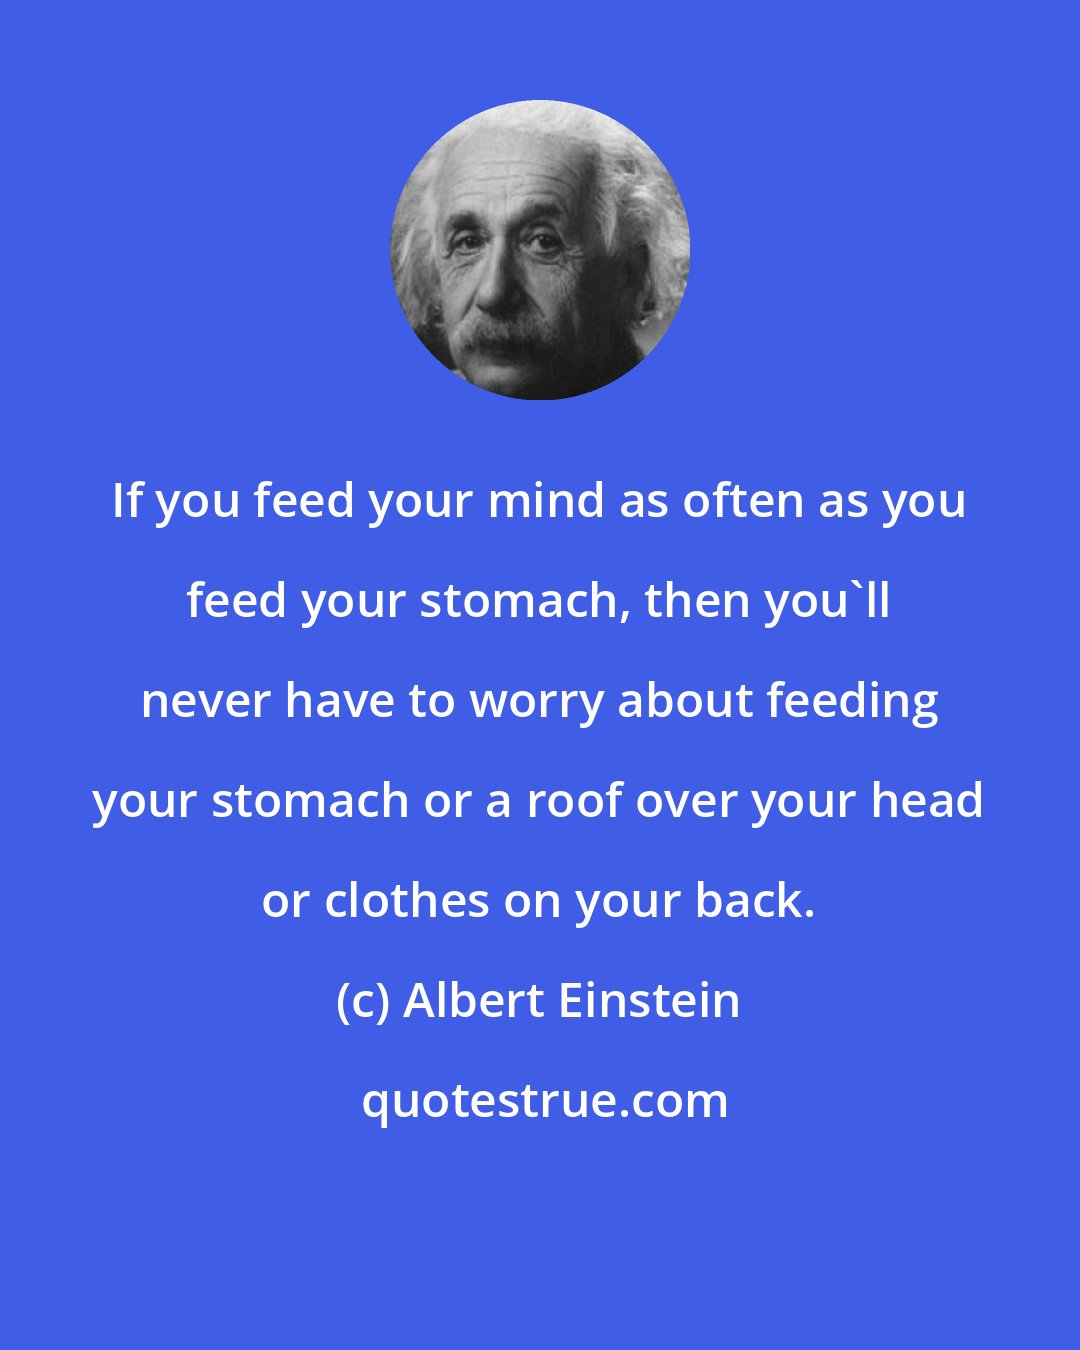 Albert Einstein: If you feed your mind as often as you feed your stomach, then you'll never have to worry about feeding your stomach or a roof over your head or clothes on your back.